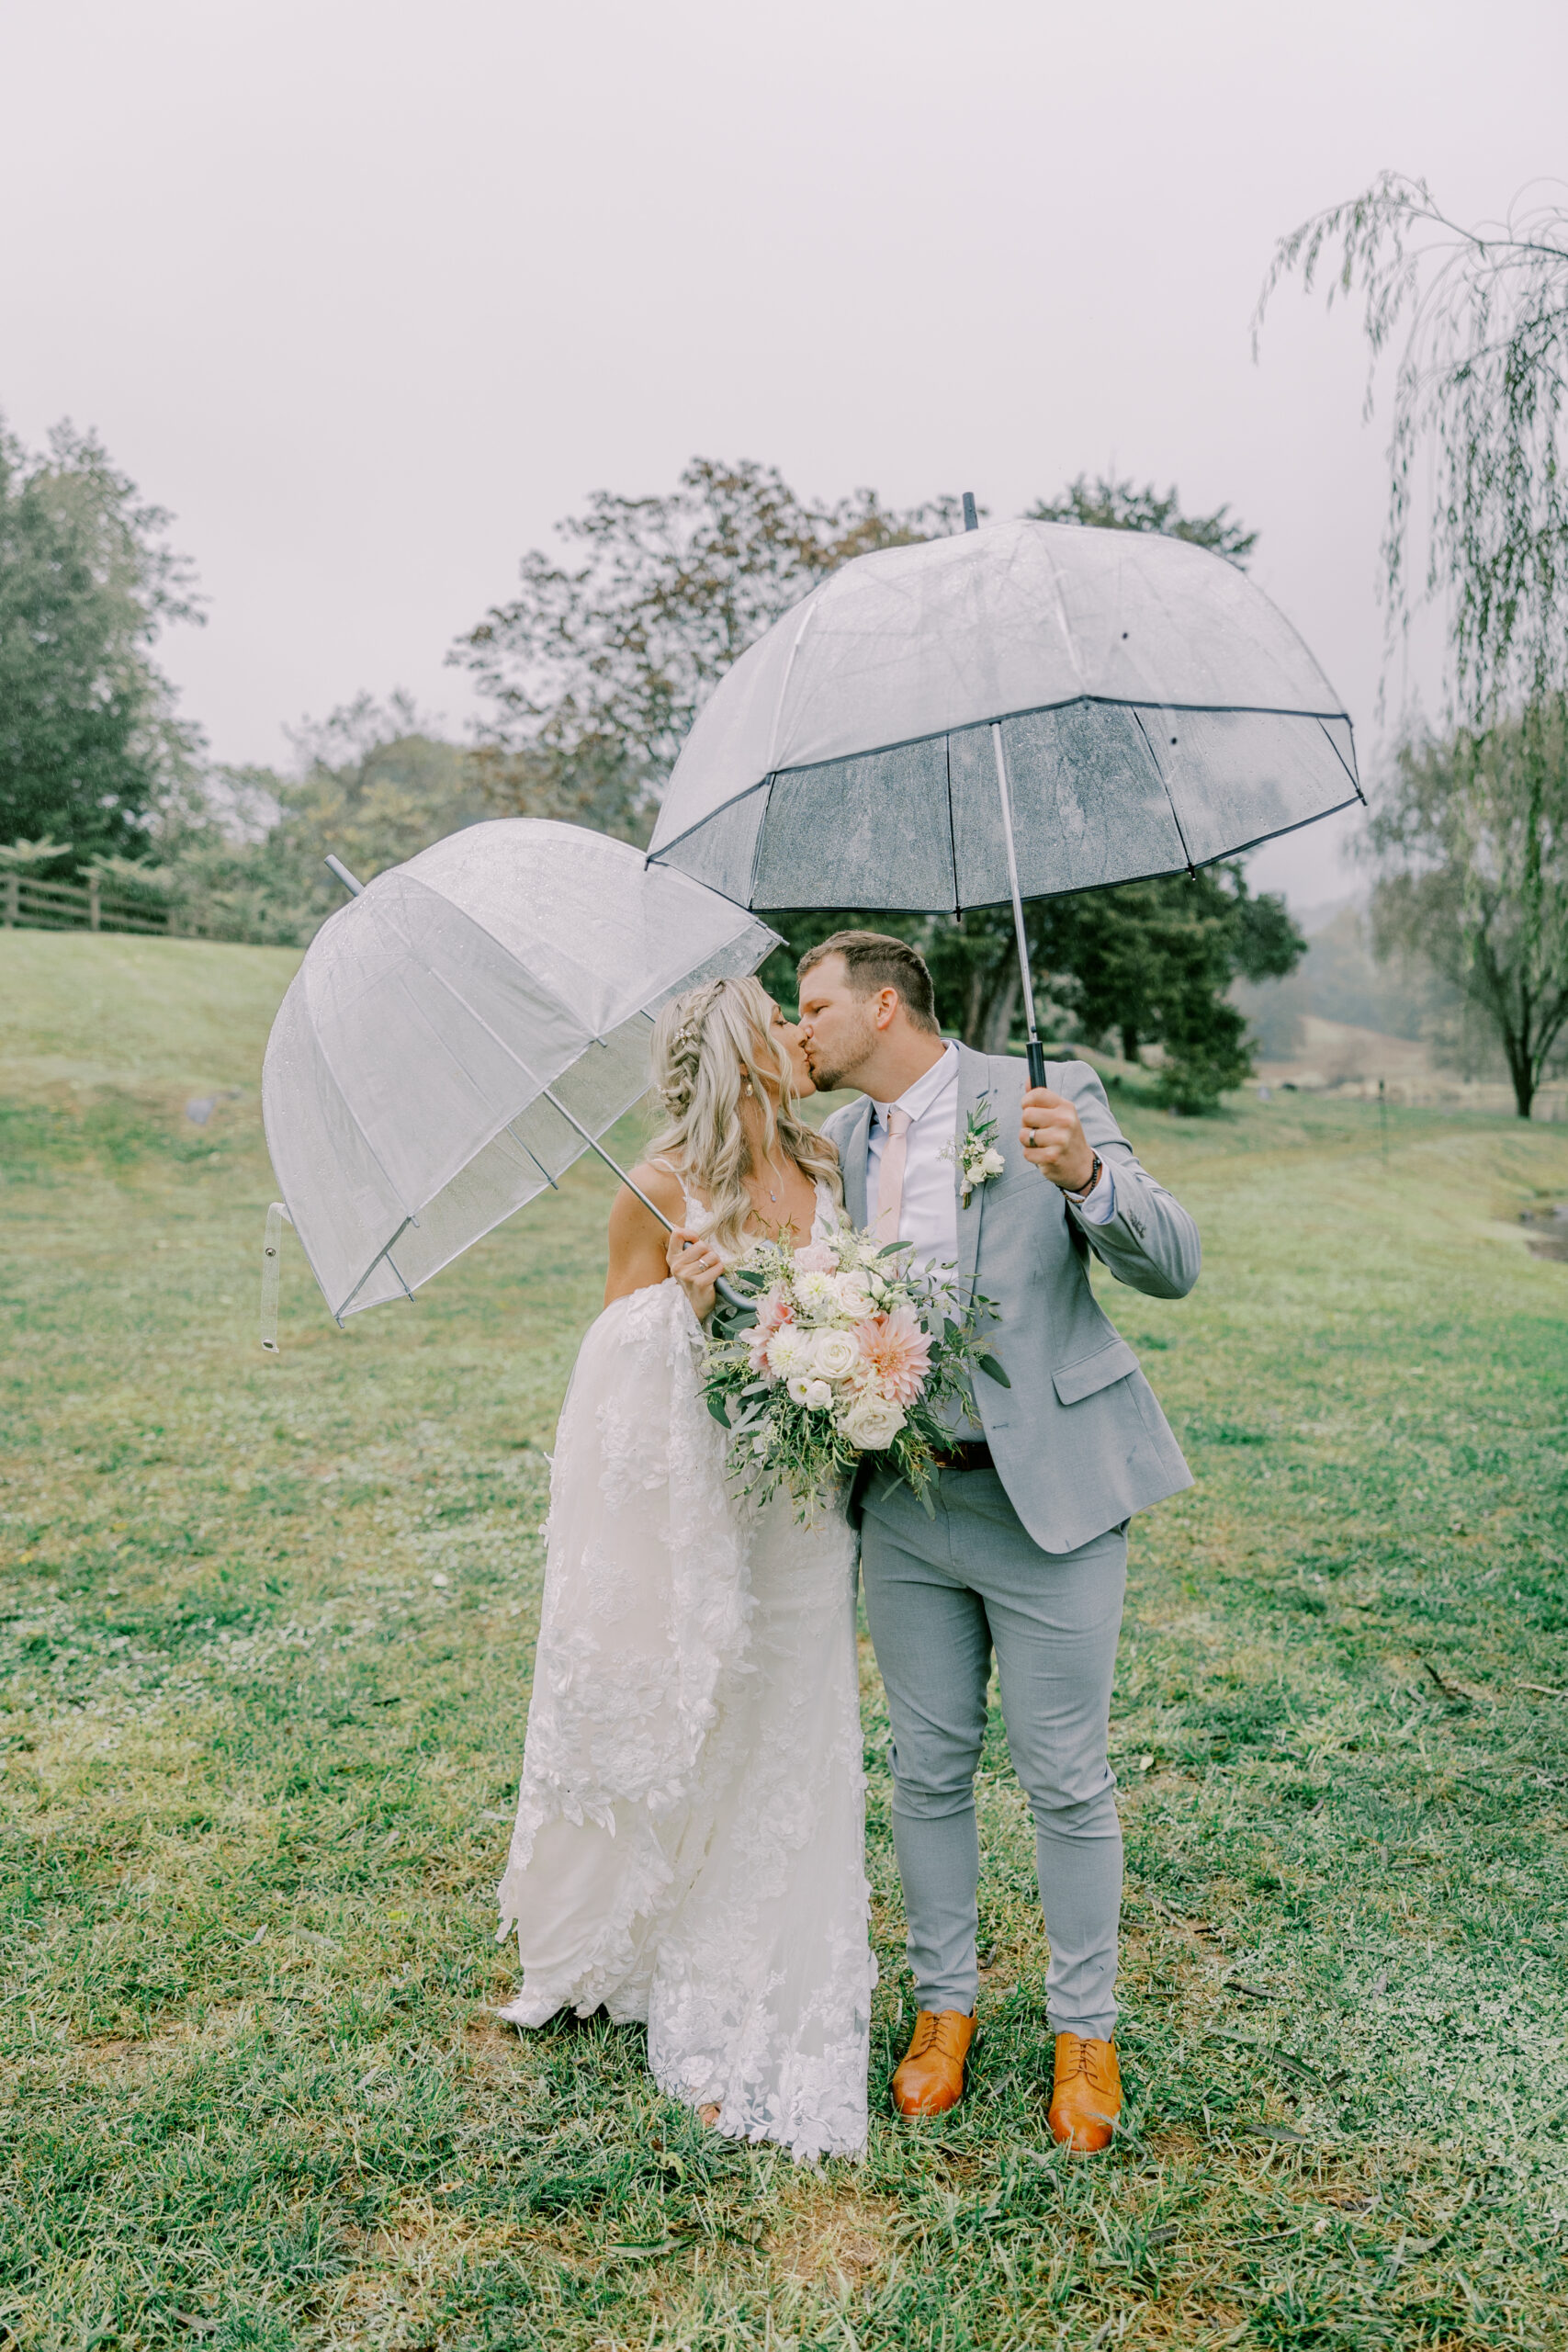 bride and groom pose for a kiss under umbrellas during their rainy wedding day